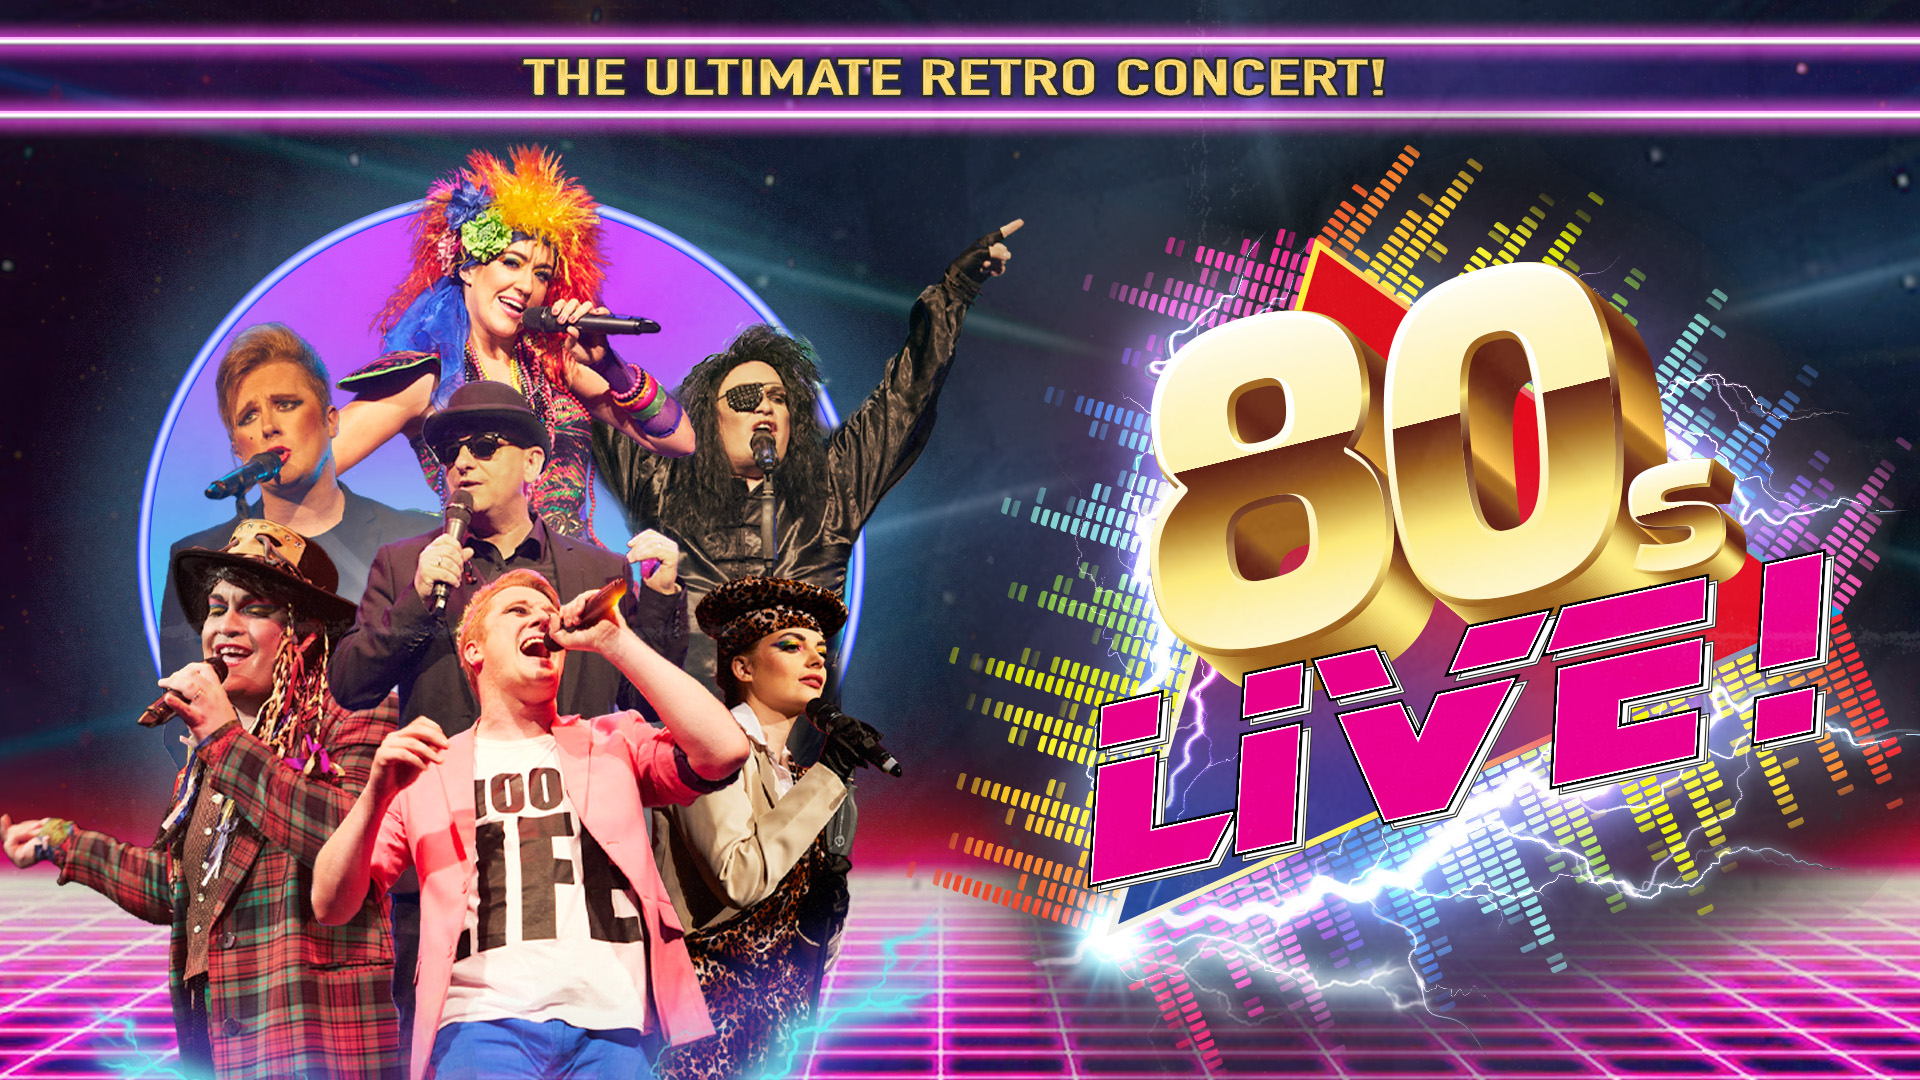 Six people in costumes resembling various 80s icons pose in front of a retro themed background